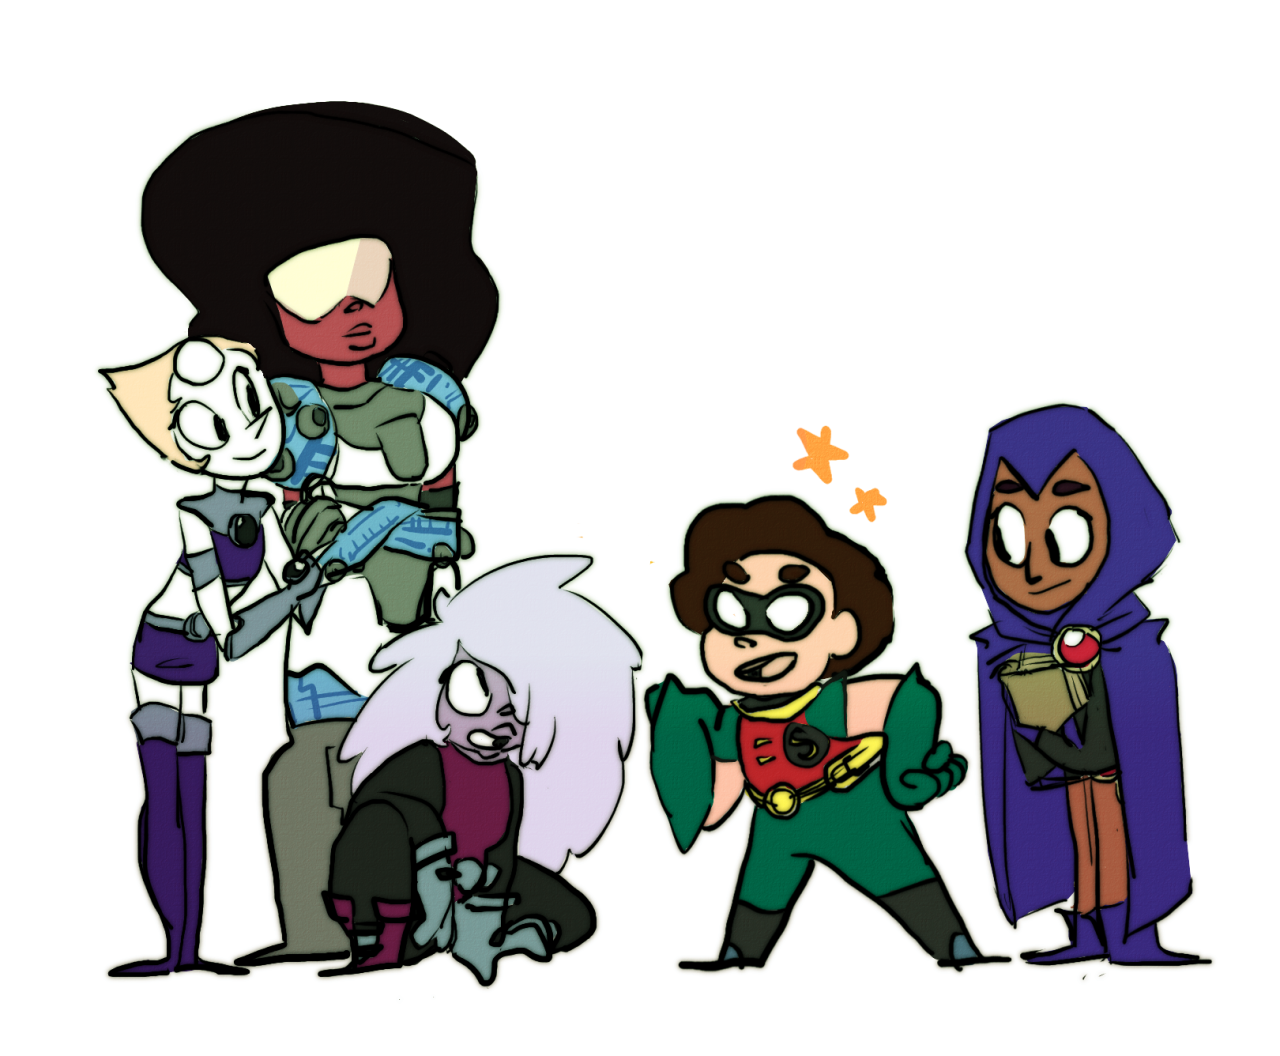 kowskie:  So I thought the su60minutes cosplay prompt was an adorable idea and tried